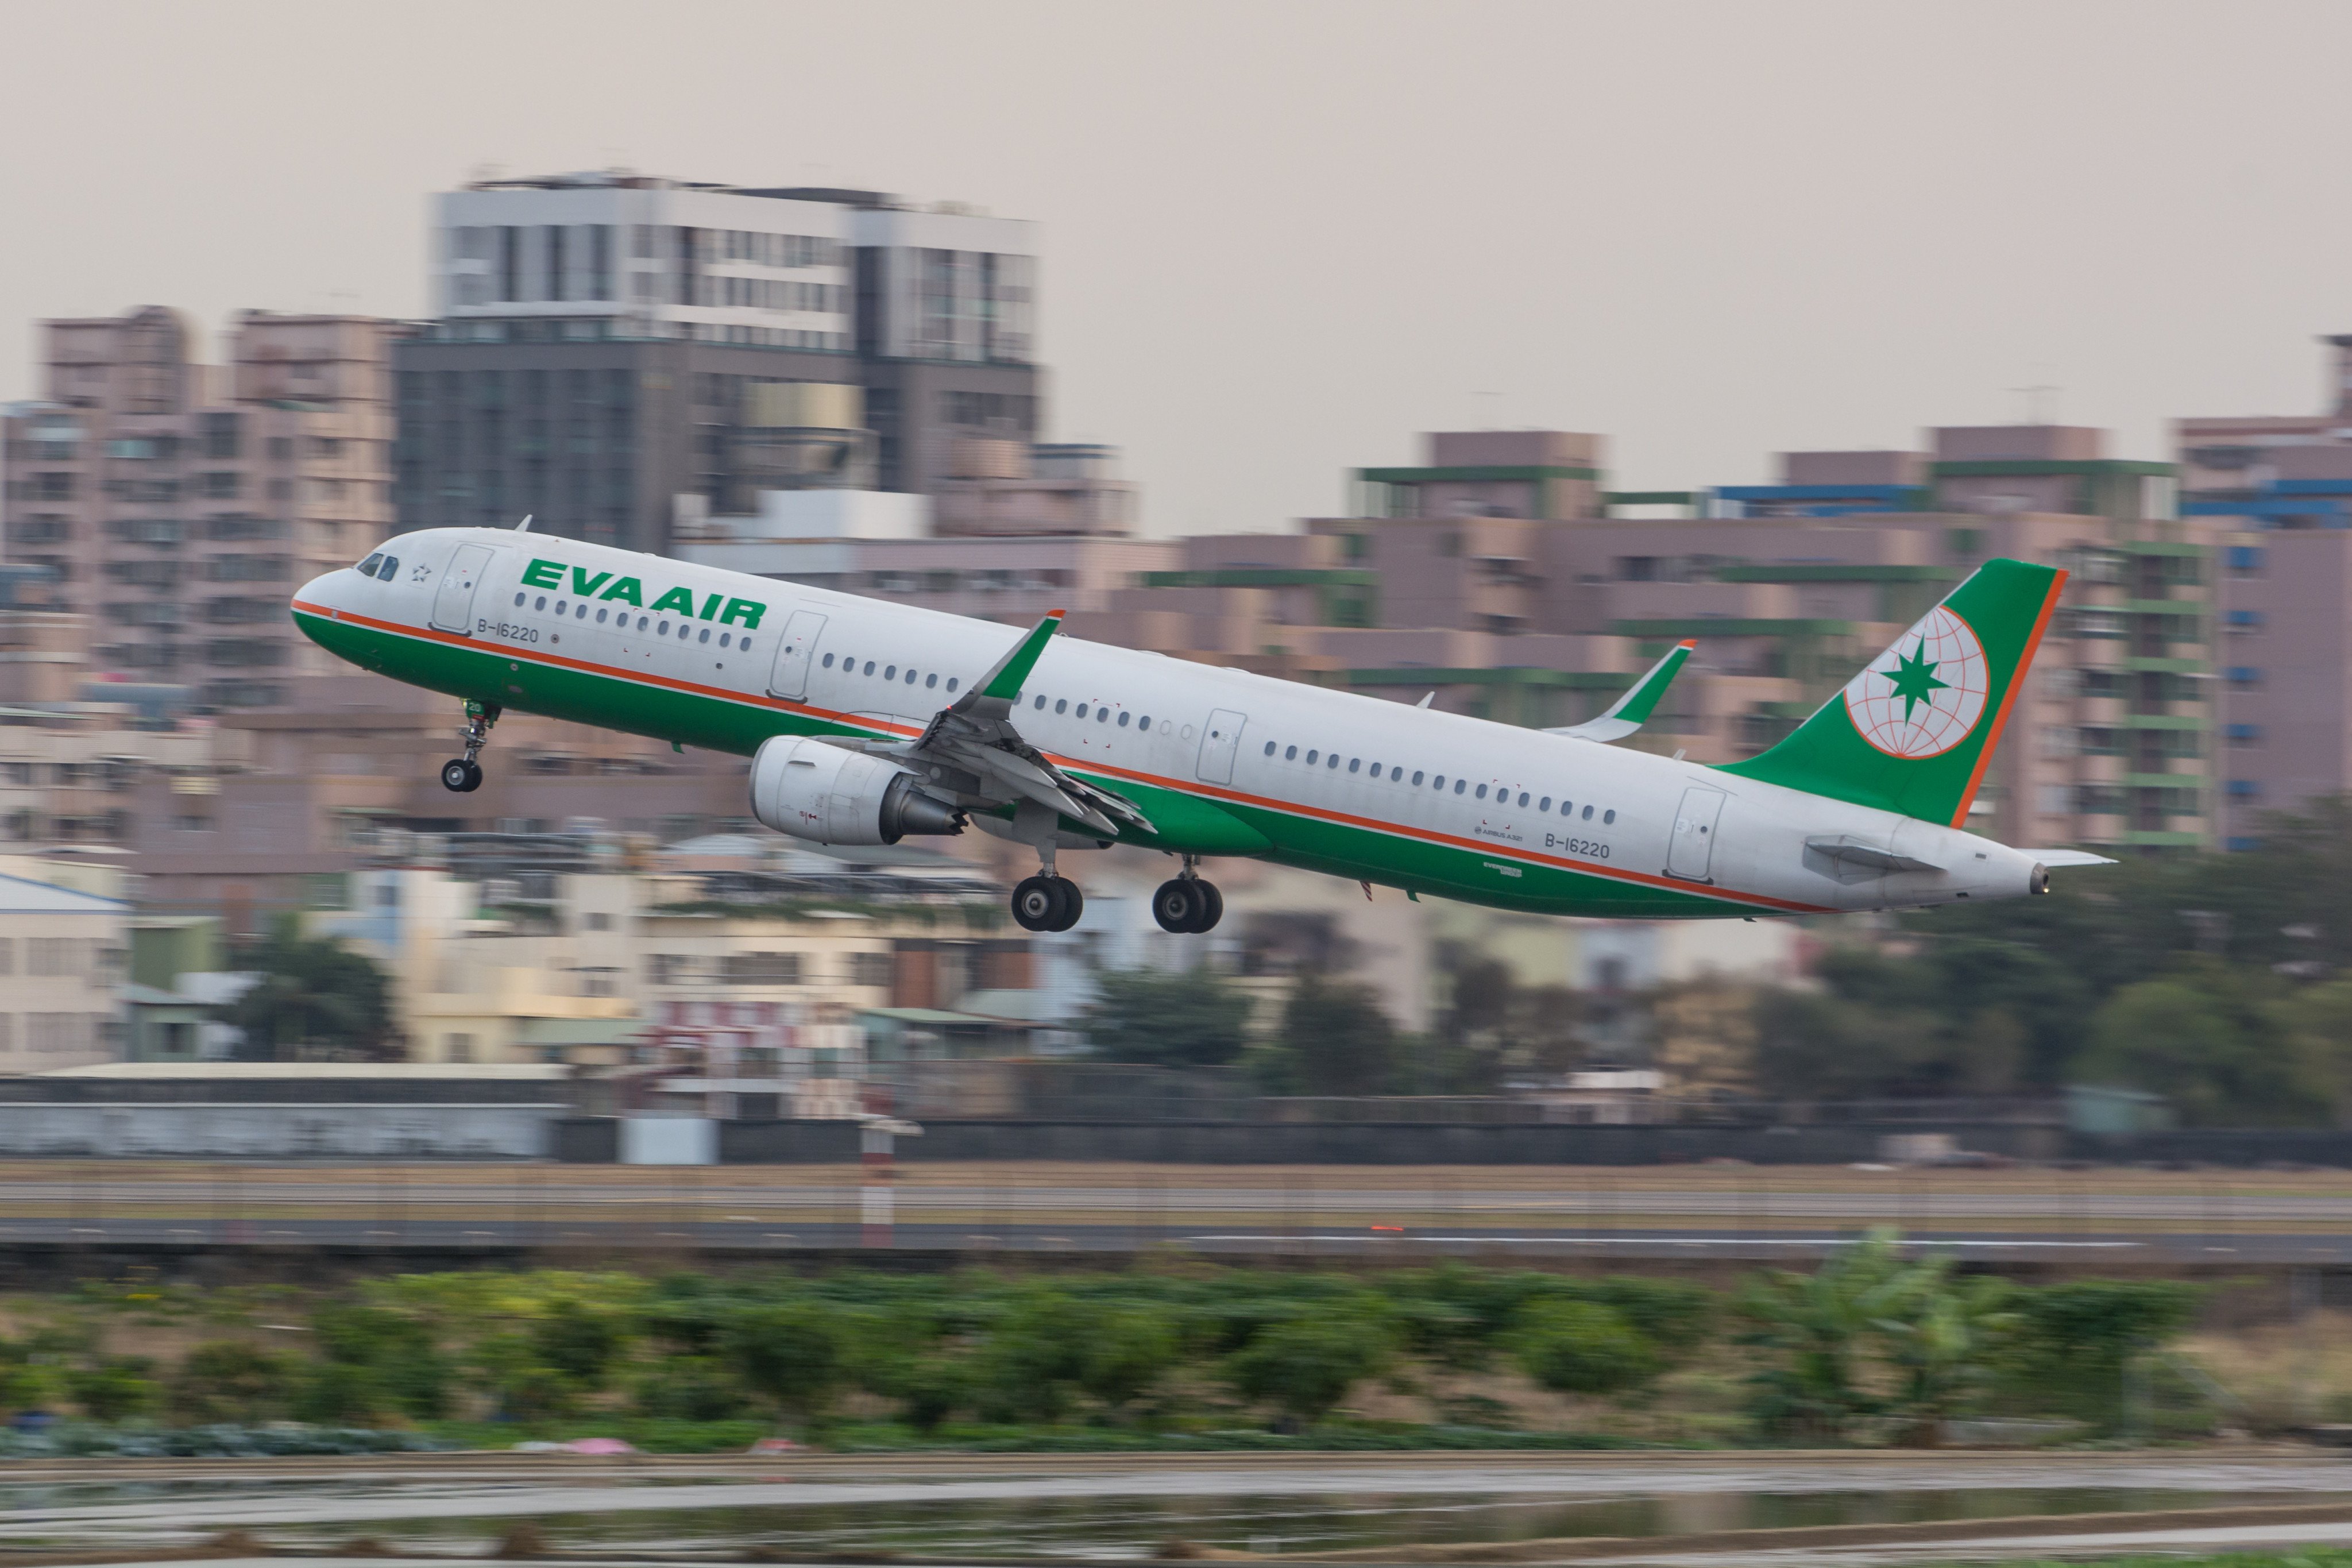 EVA Airways intends to increase its total Taiwan flights gradually, rather than rush to get back to pre-pandemic levels. Photo: Shutterstock